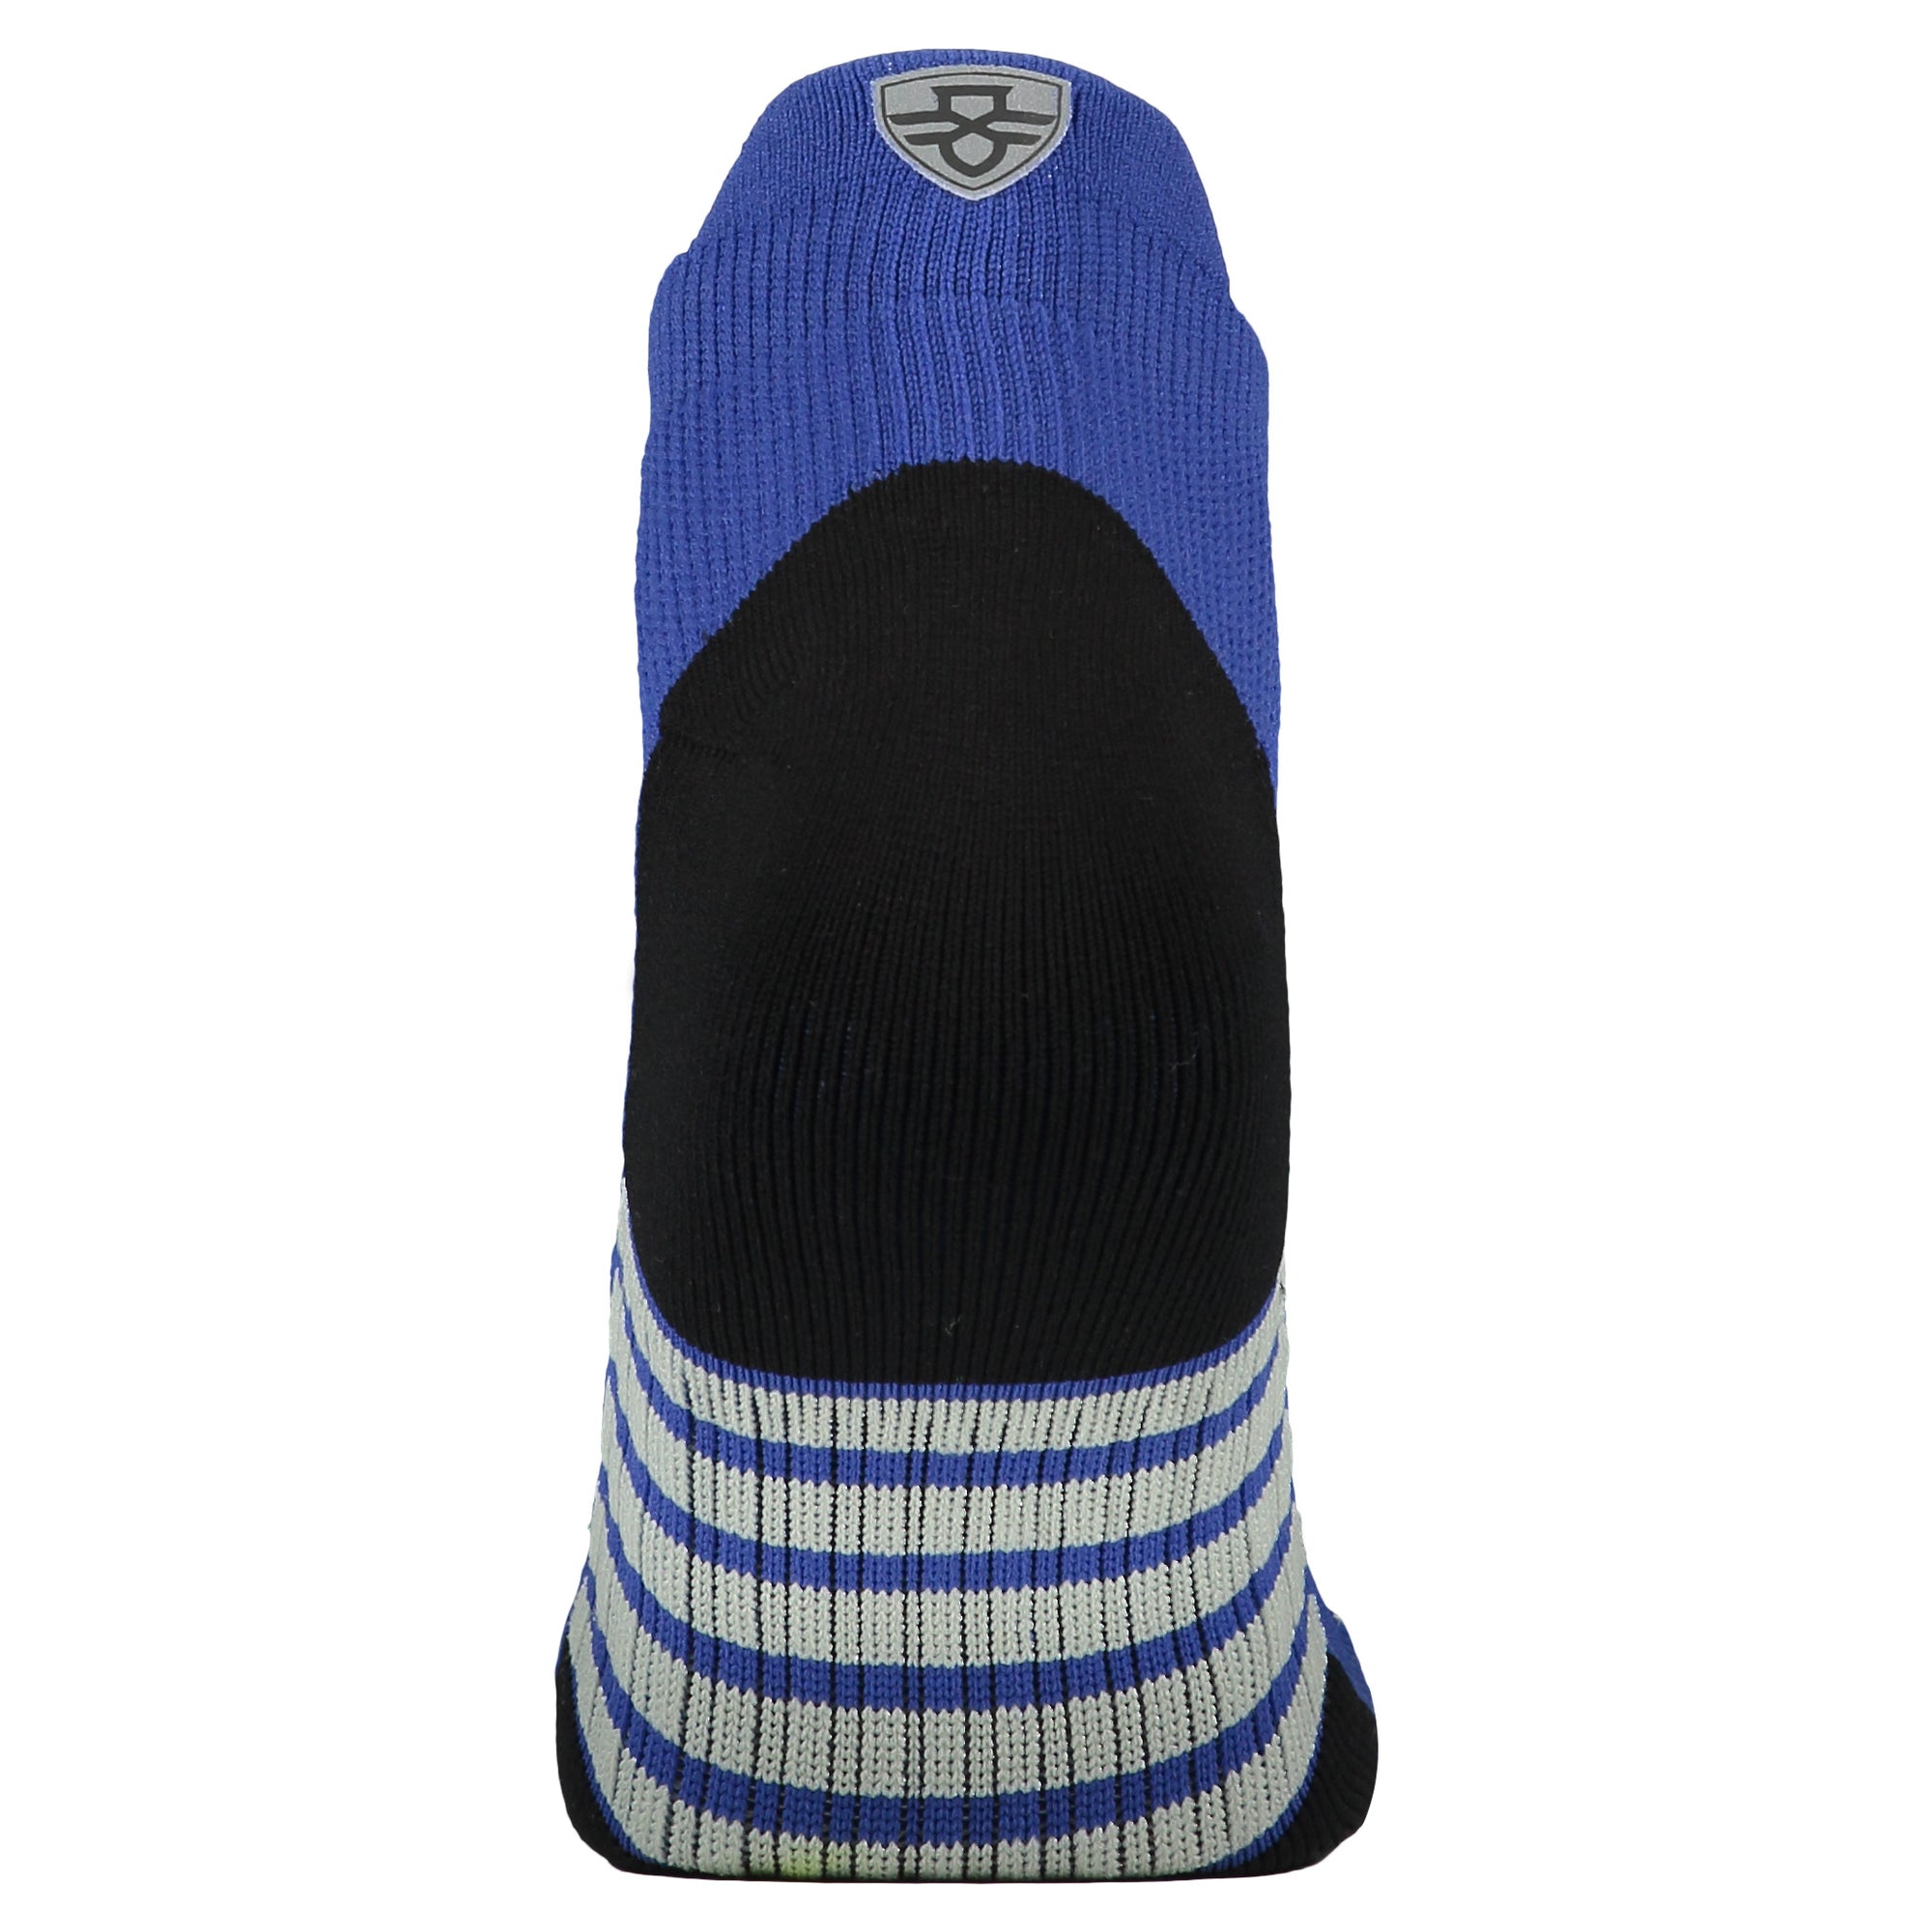 Crossfly men's Vent Low Socks in royal / black from the Performance series, featuring AirVent and AirBeams.